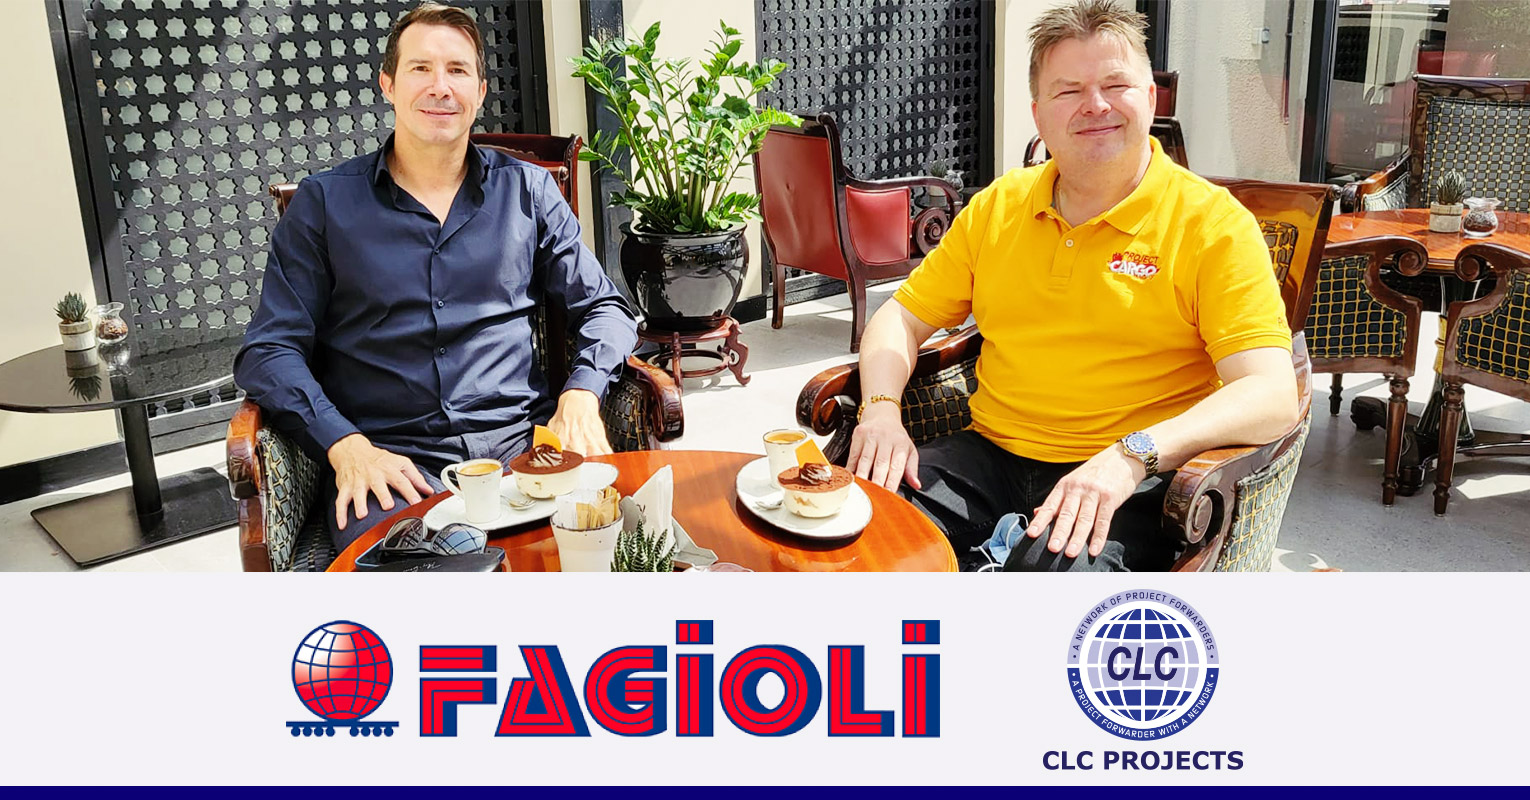 CLC Projects Chairman met with Andy Hall, General Manager at Fagioli in Abu Dhabi, U.A.E.